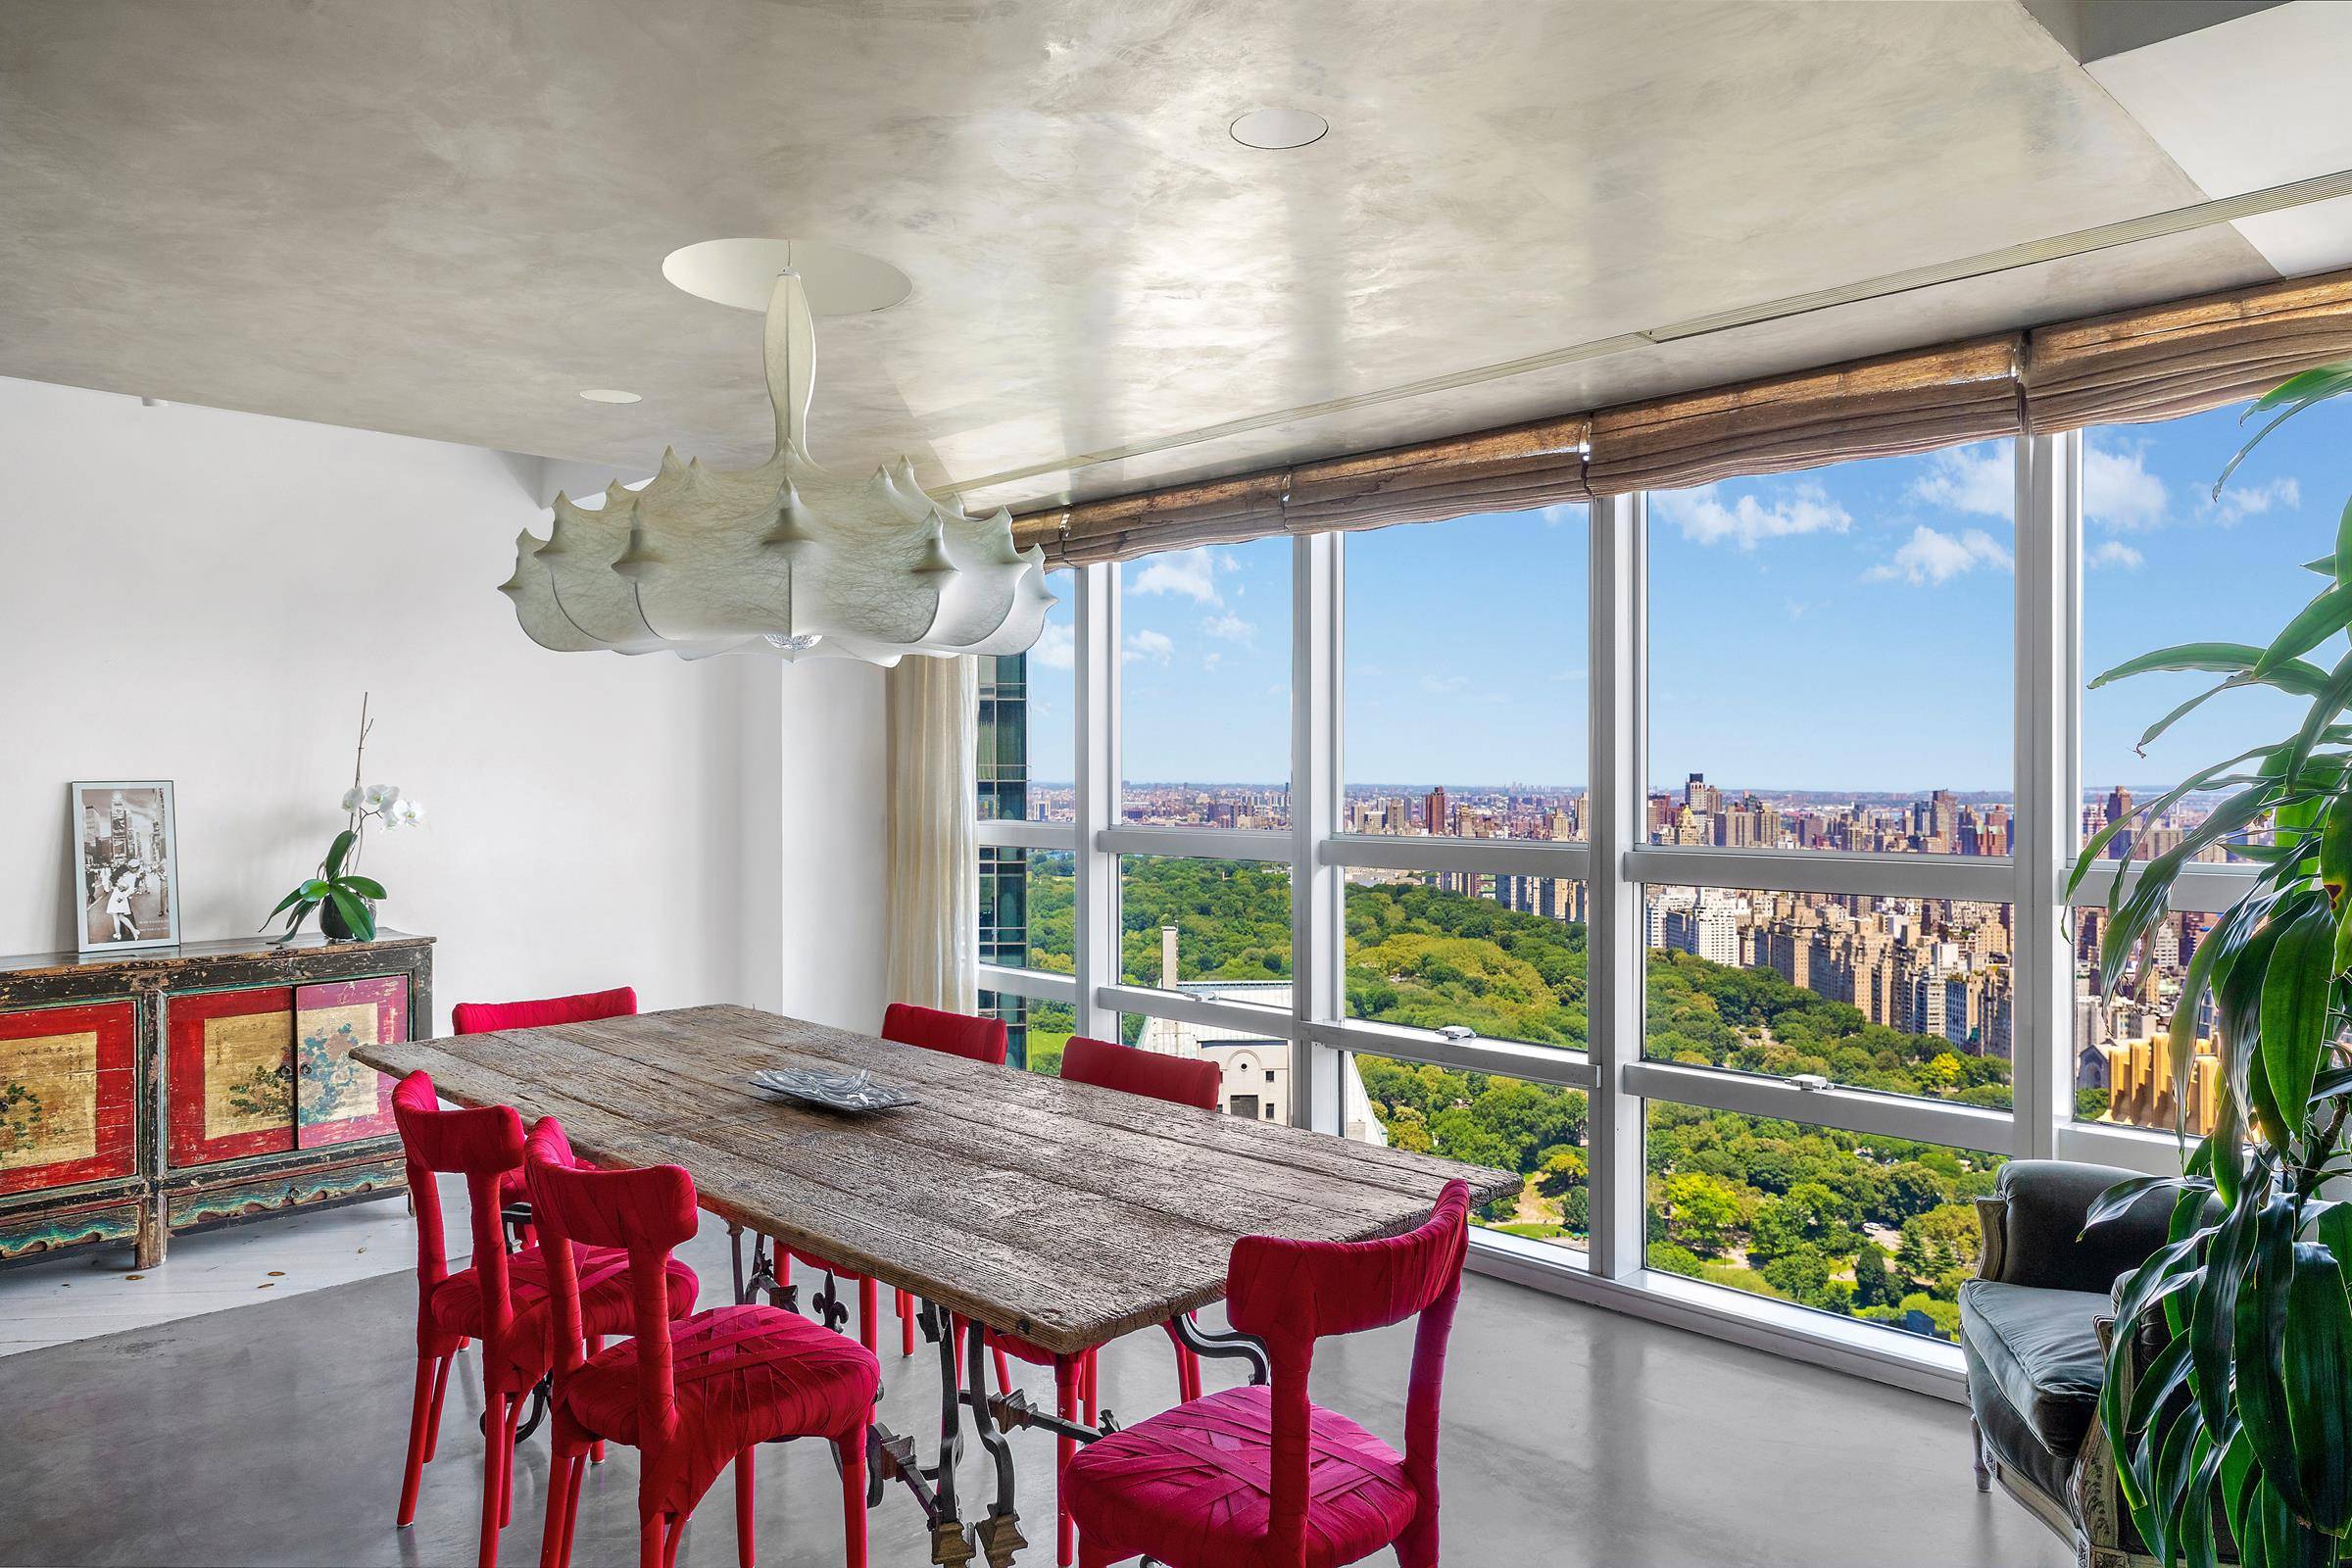 Welcome home to Apartment 61T located in the highly sought after Metropolitan Tower at 146 West 57th Street on Billionaire s Row.